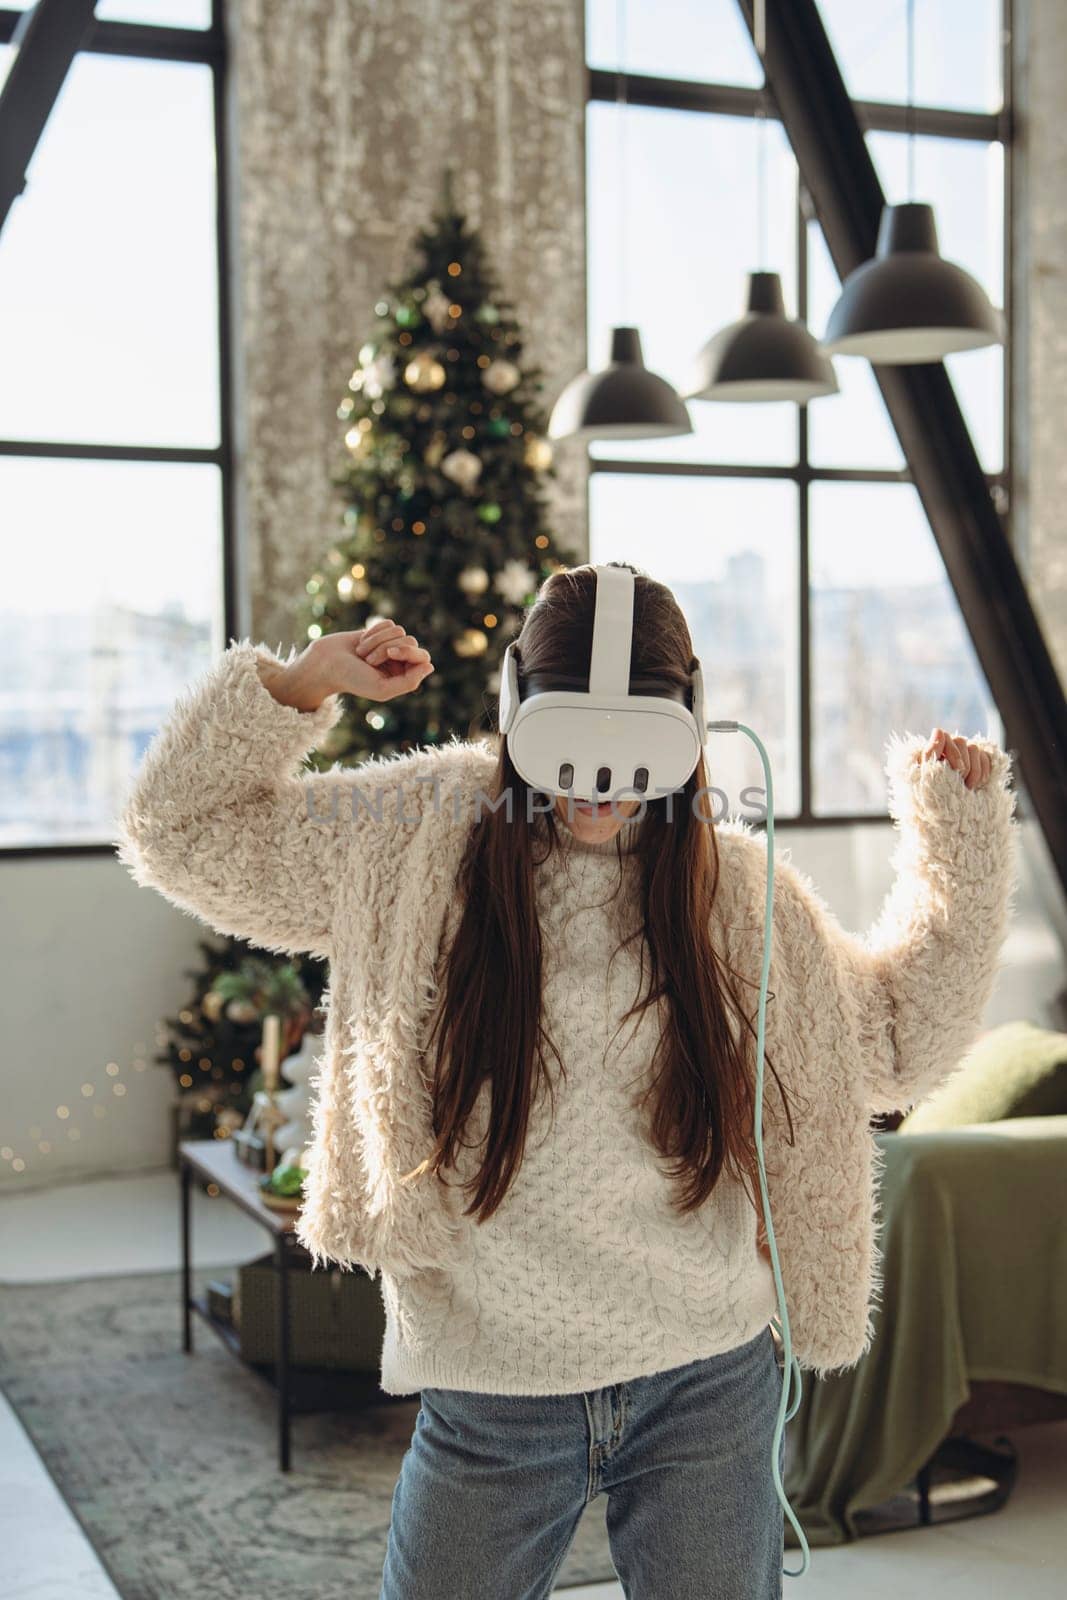 Engaged in virtual reality, a stunning young woman stands near a Christmas tree. High quality photo